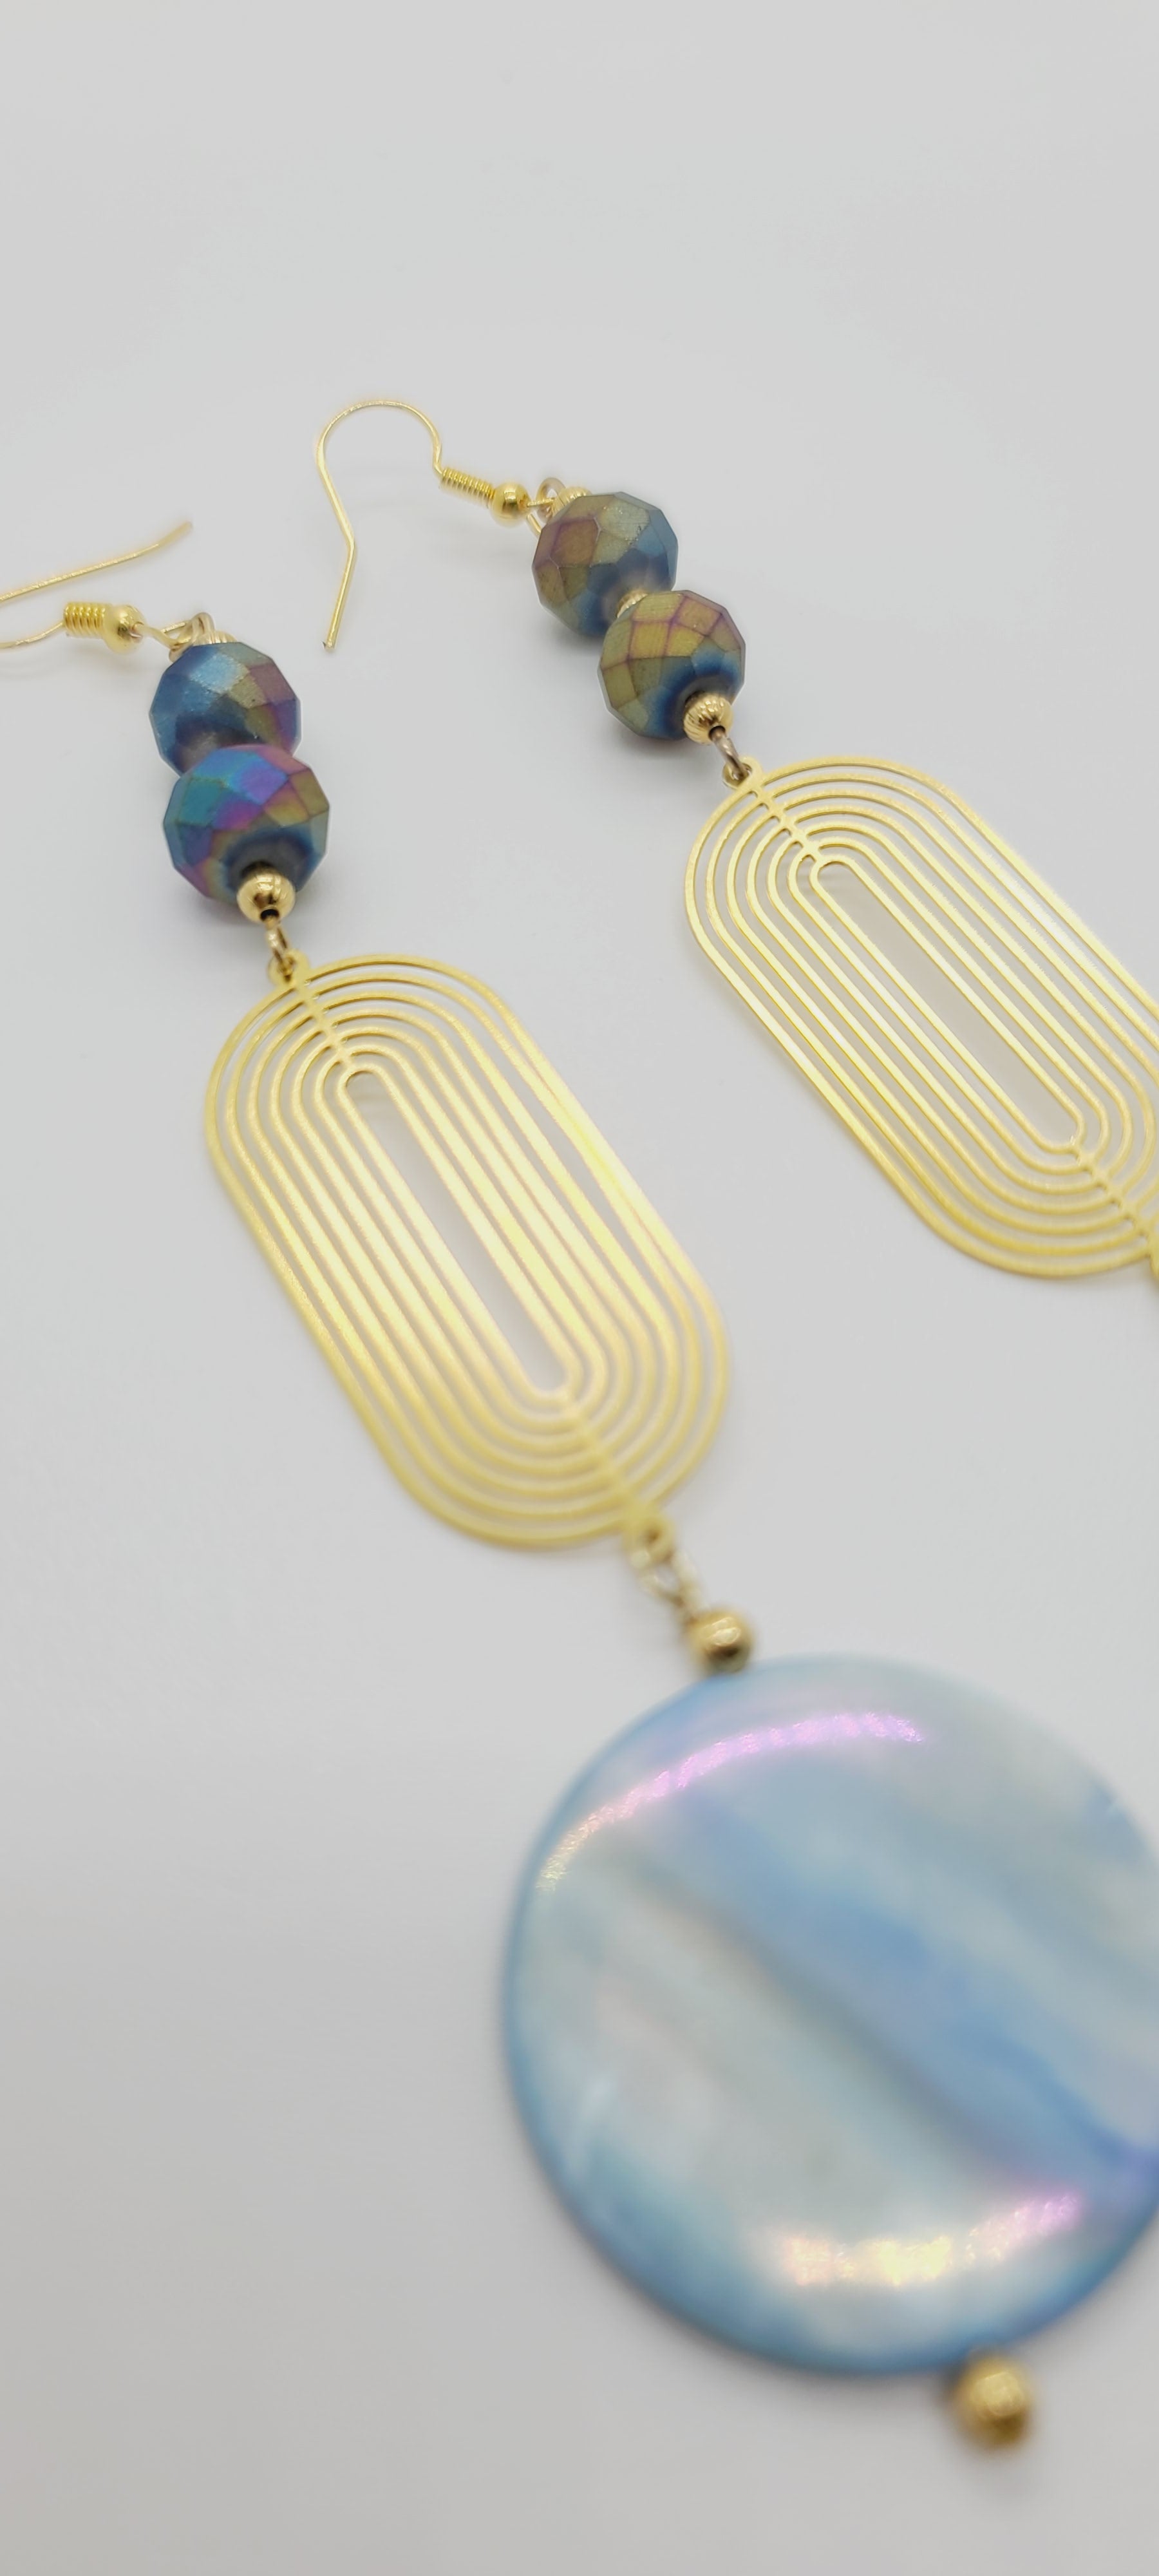 Length: 5 inches | Weight: 0.6 ounces  Distinctly You! These earrings are made with blue Abalone Shell discs, 10mm iridescent blue purple faceted glass stones, gold seed beads, and art deco oval gold charm.